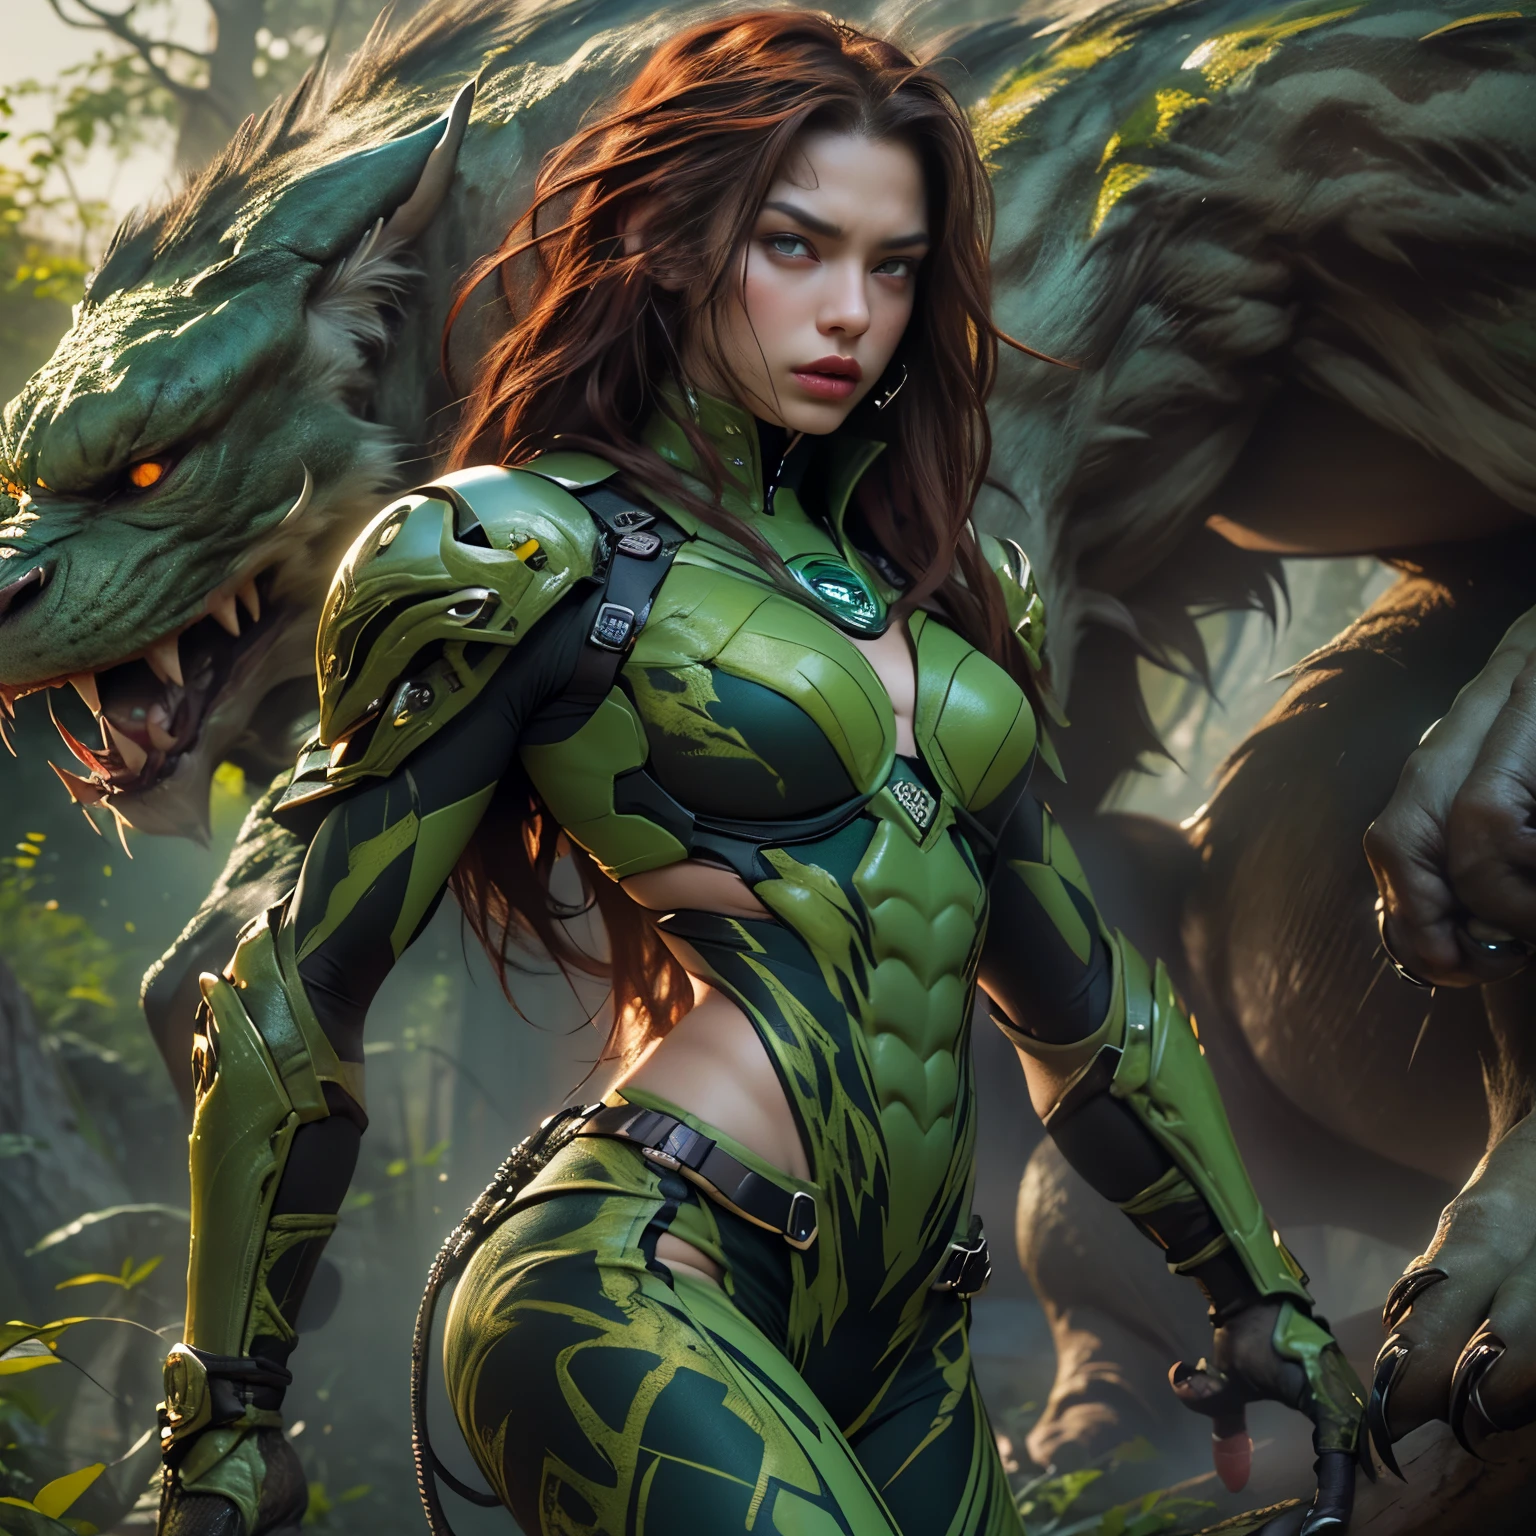 1 female alien, The predator, (extremely beautiful:1.2), (intense gaze:1.4), (predator:1.1), long dark claws, (NSFW:1), nipples, thick eyebrows, (She has shining emerald green eyes:1.2), the most beautiful face in the universe, red hair, symmetrical beautiful eyes, hyper detailed eyes,

A woman predator with an extremely beautiful face, her intense gaze fixed on her prey, a primal force that could not be denied.

(beautiful lean body:1.5), (muscular build:1.2), (prowling:1.3), (sleek movements:1.4)

Her beautiful body, muscular and toned, moved with sleek grace as she prowled, ready to strike at a moment's notice. The predator within her was always on,                                                                          
                                                                                                                                                               
 cinematic drawing of characters, ultra high quality model, cinematic quality, detail up, (Intricate details:1.2), High resolution, High Definition, drawing faithfully, Official art, Unity 8K wall , 8K Portrait, Best Quality, Very High resolution, ultra detailed artistic photography,